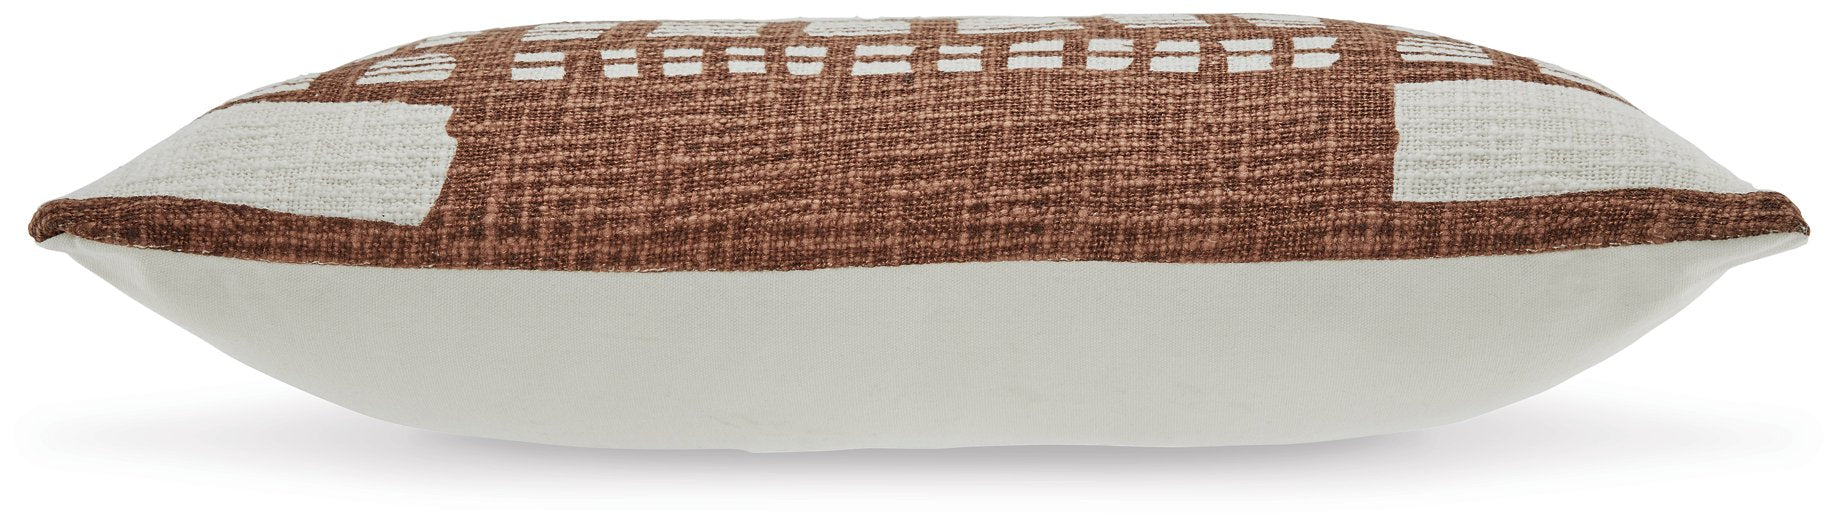 Ackford Pillow (Set of 4) - Evans Furniture (CO)